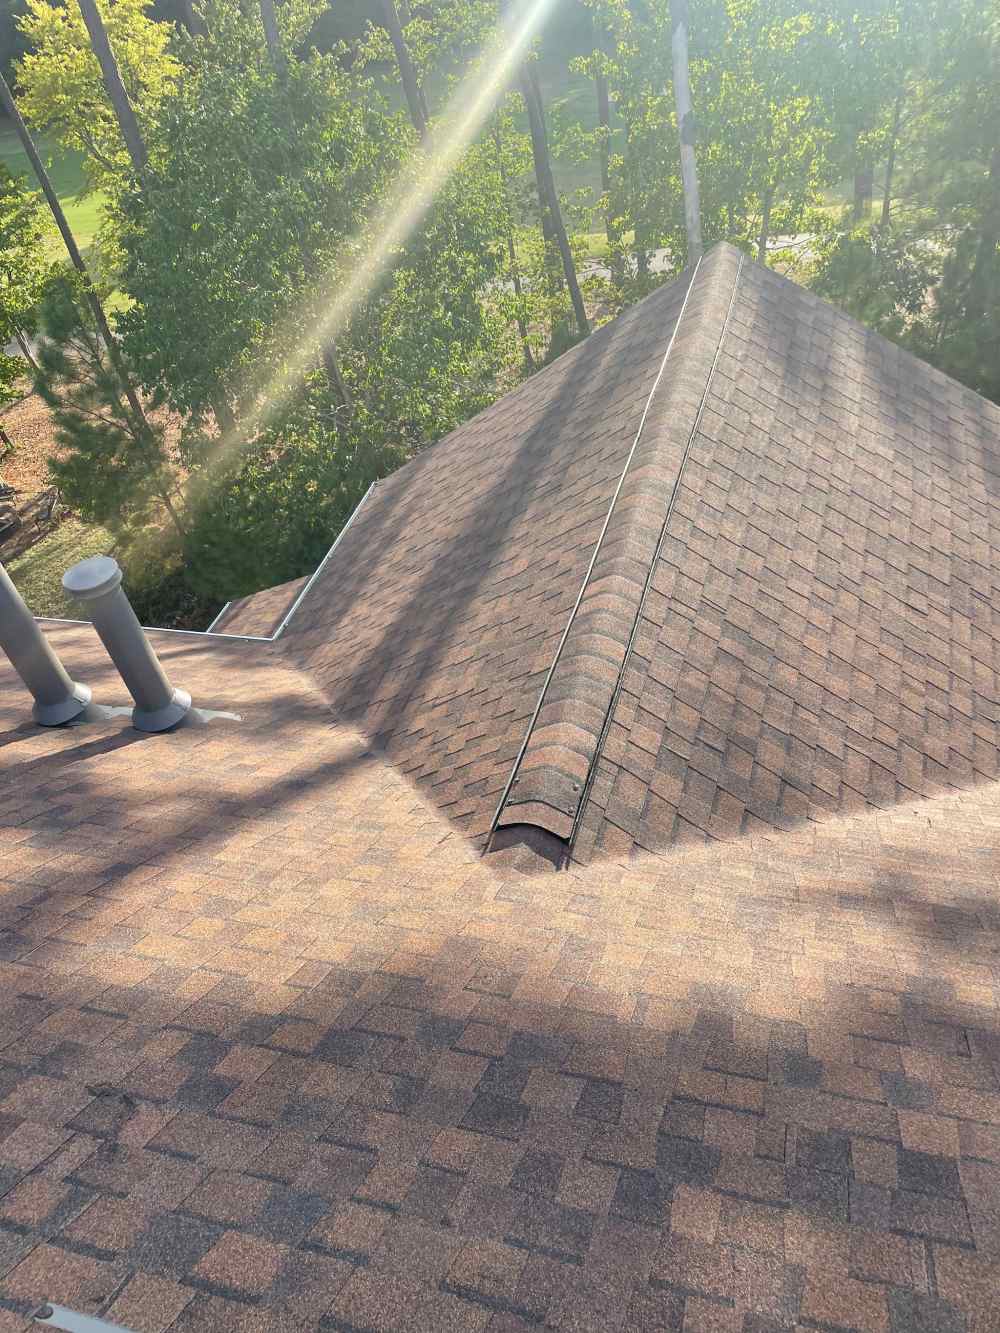 Roof of a house with a shingle